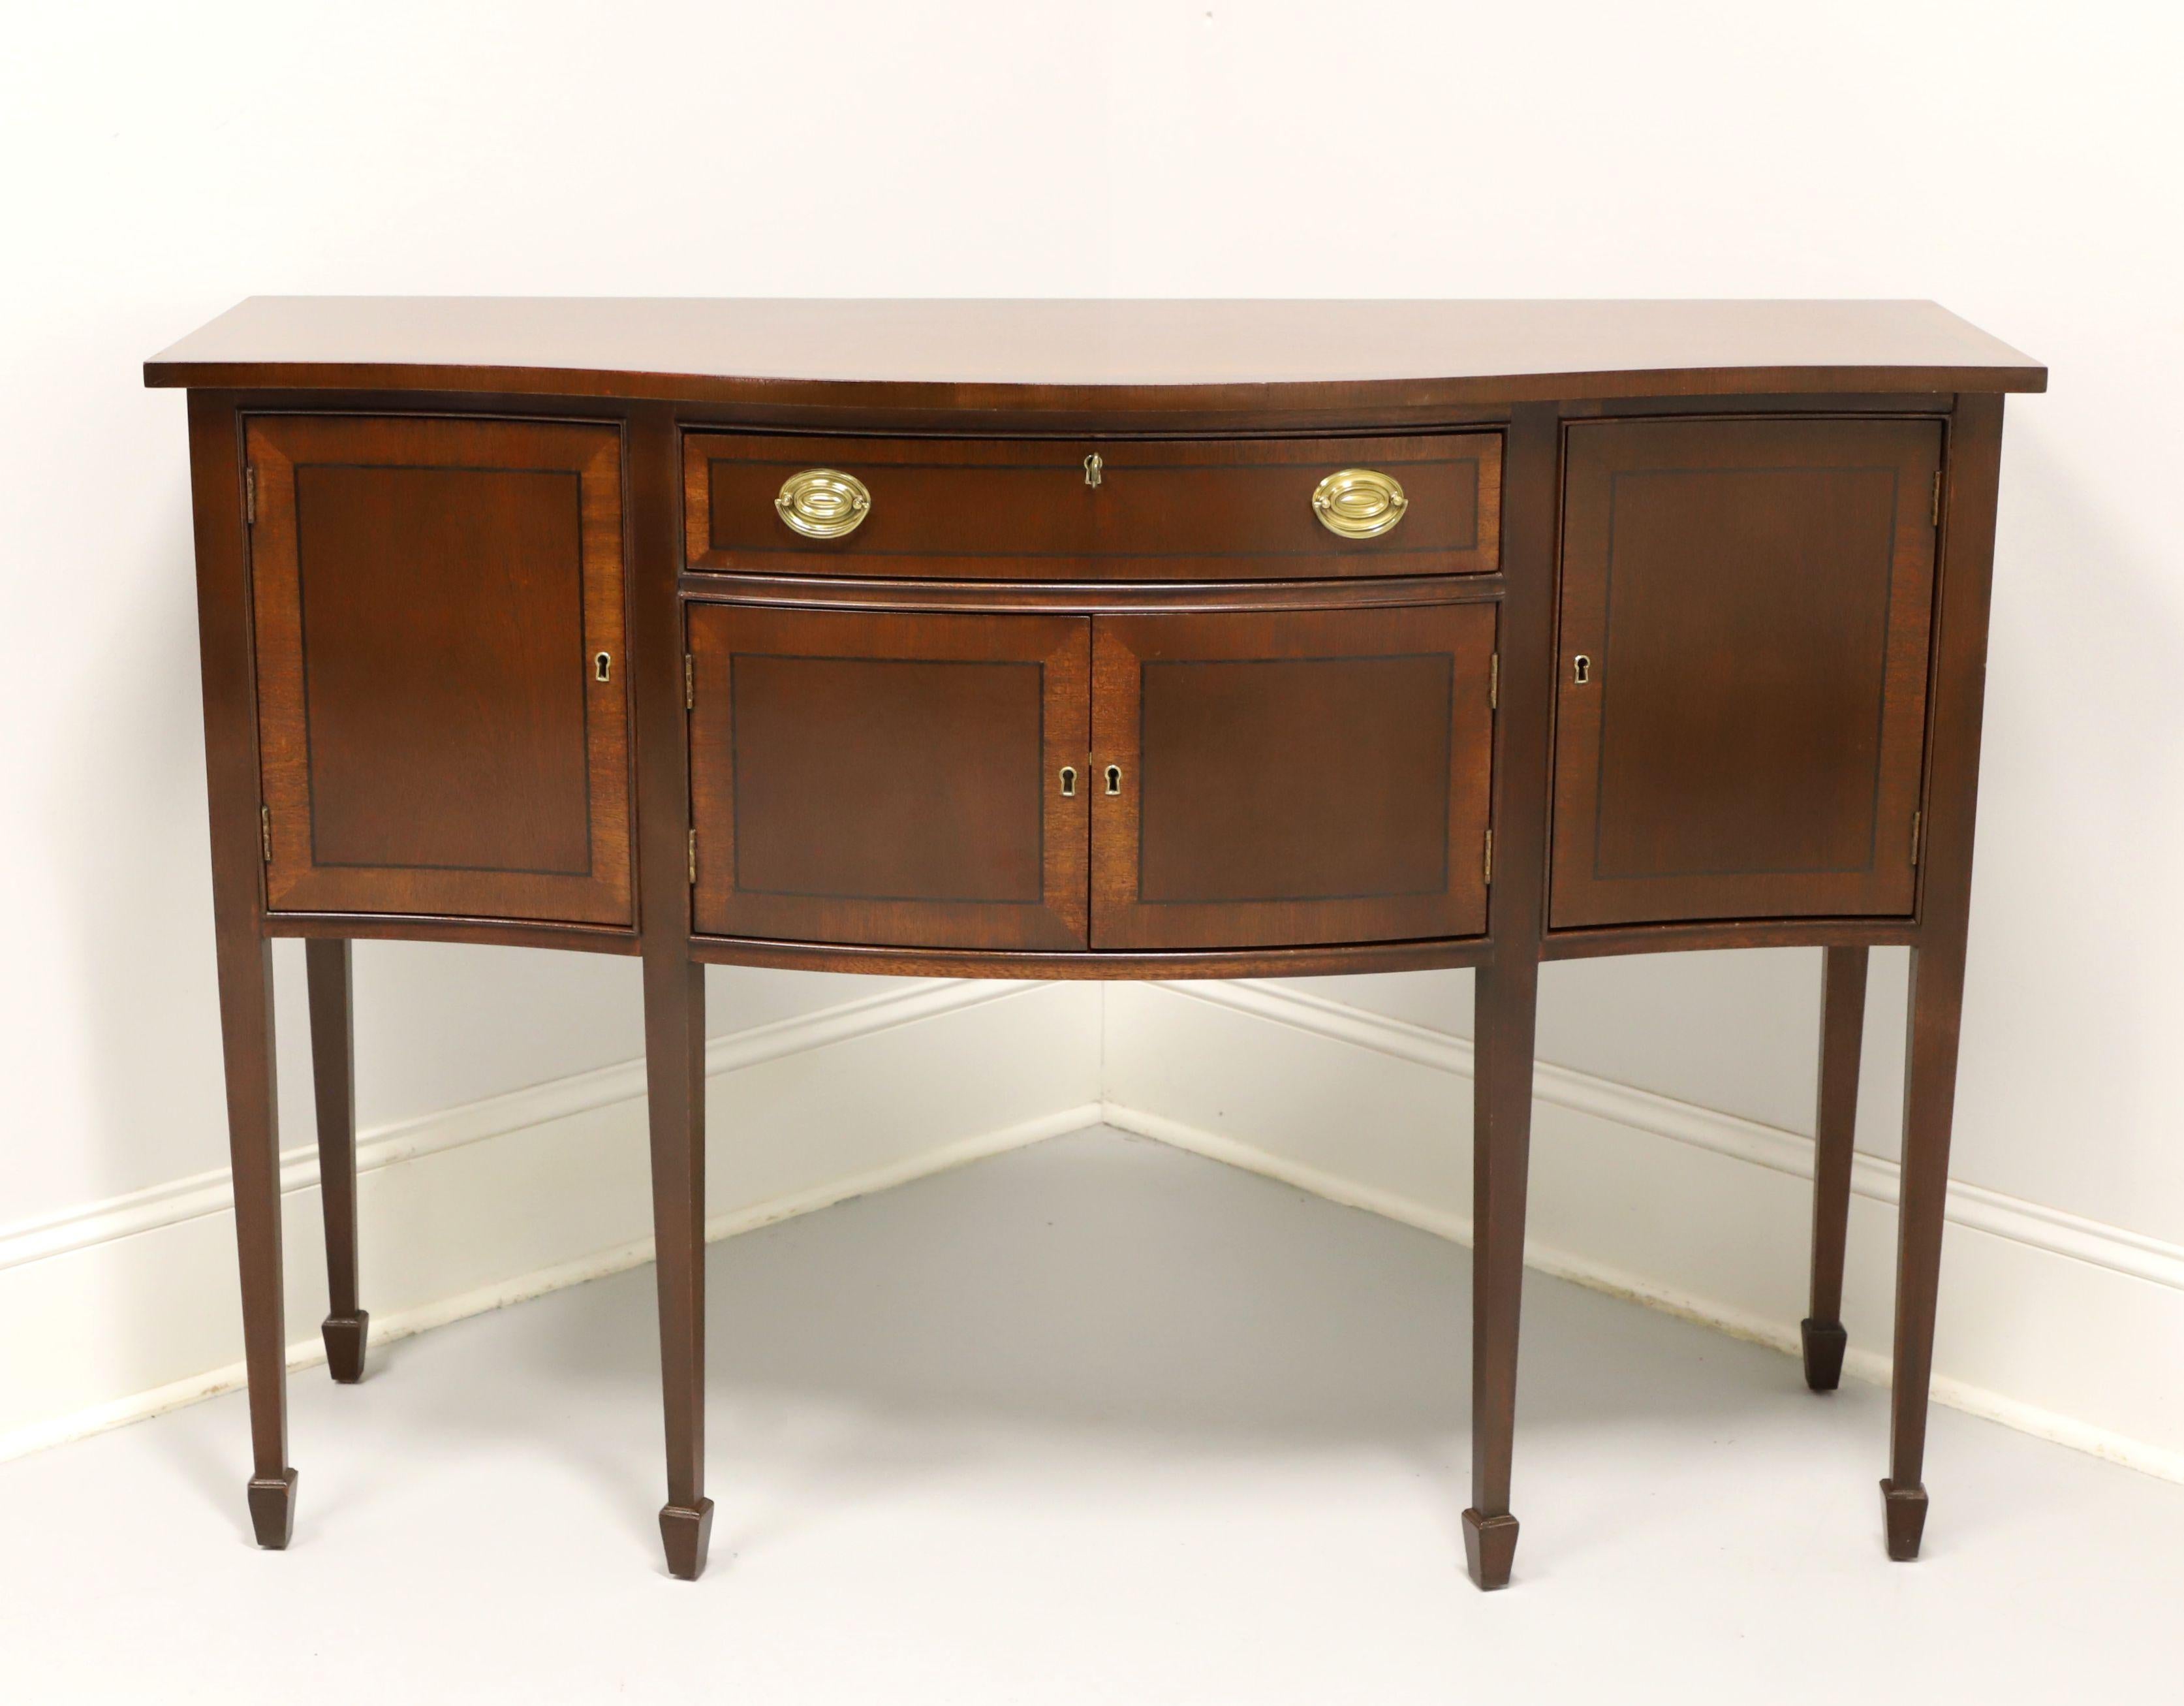 A Hepplewhite style sideboard by Tradition House, of Hanover, Pennsylvania, USA. Mahogany with brass hardware, banded top, bowfront, banded door & drawer fronts, straight tapered legs and spade feet. Features a center lockable drawer that has felt